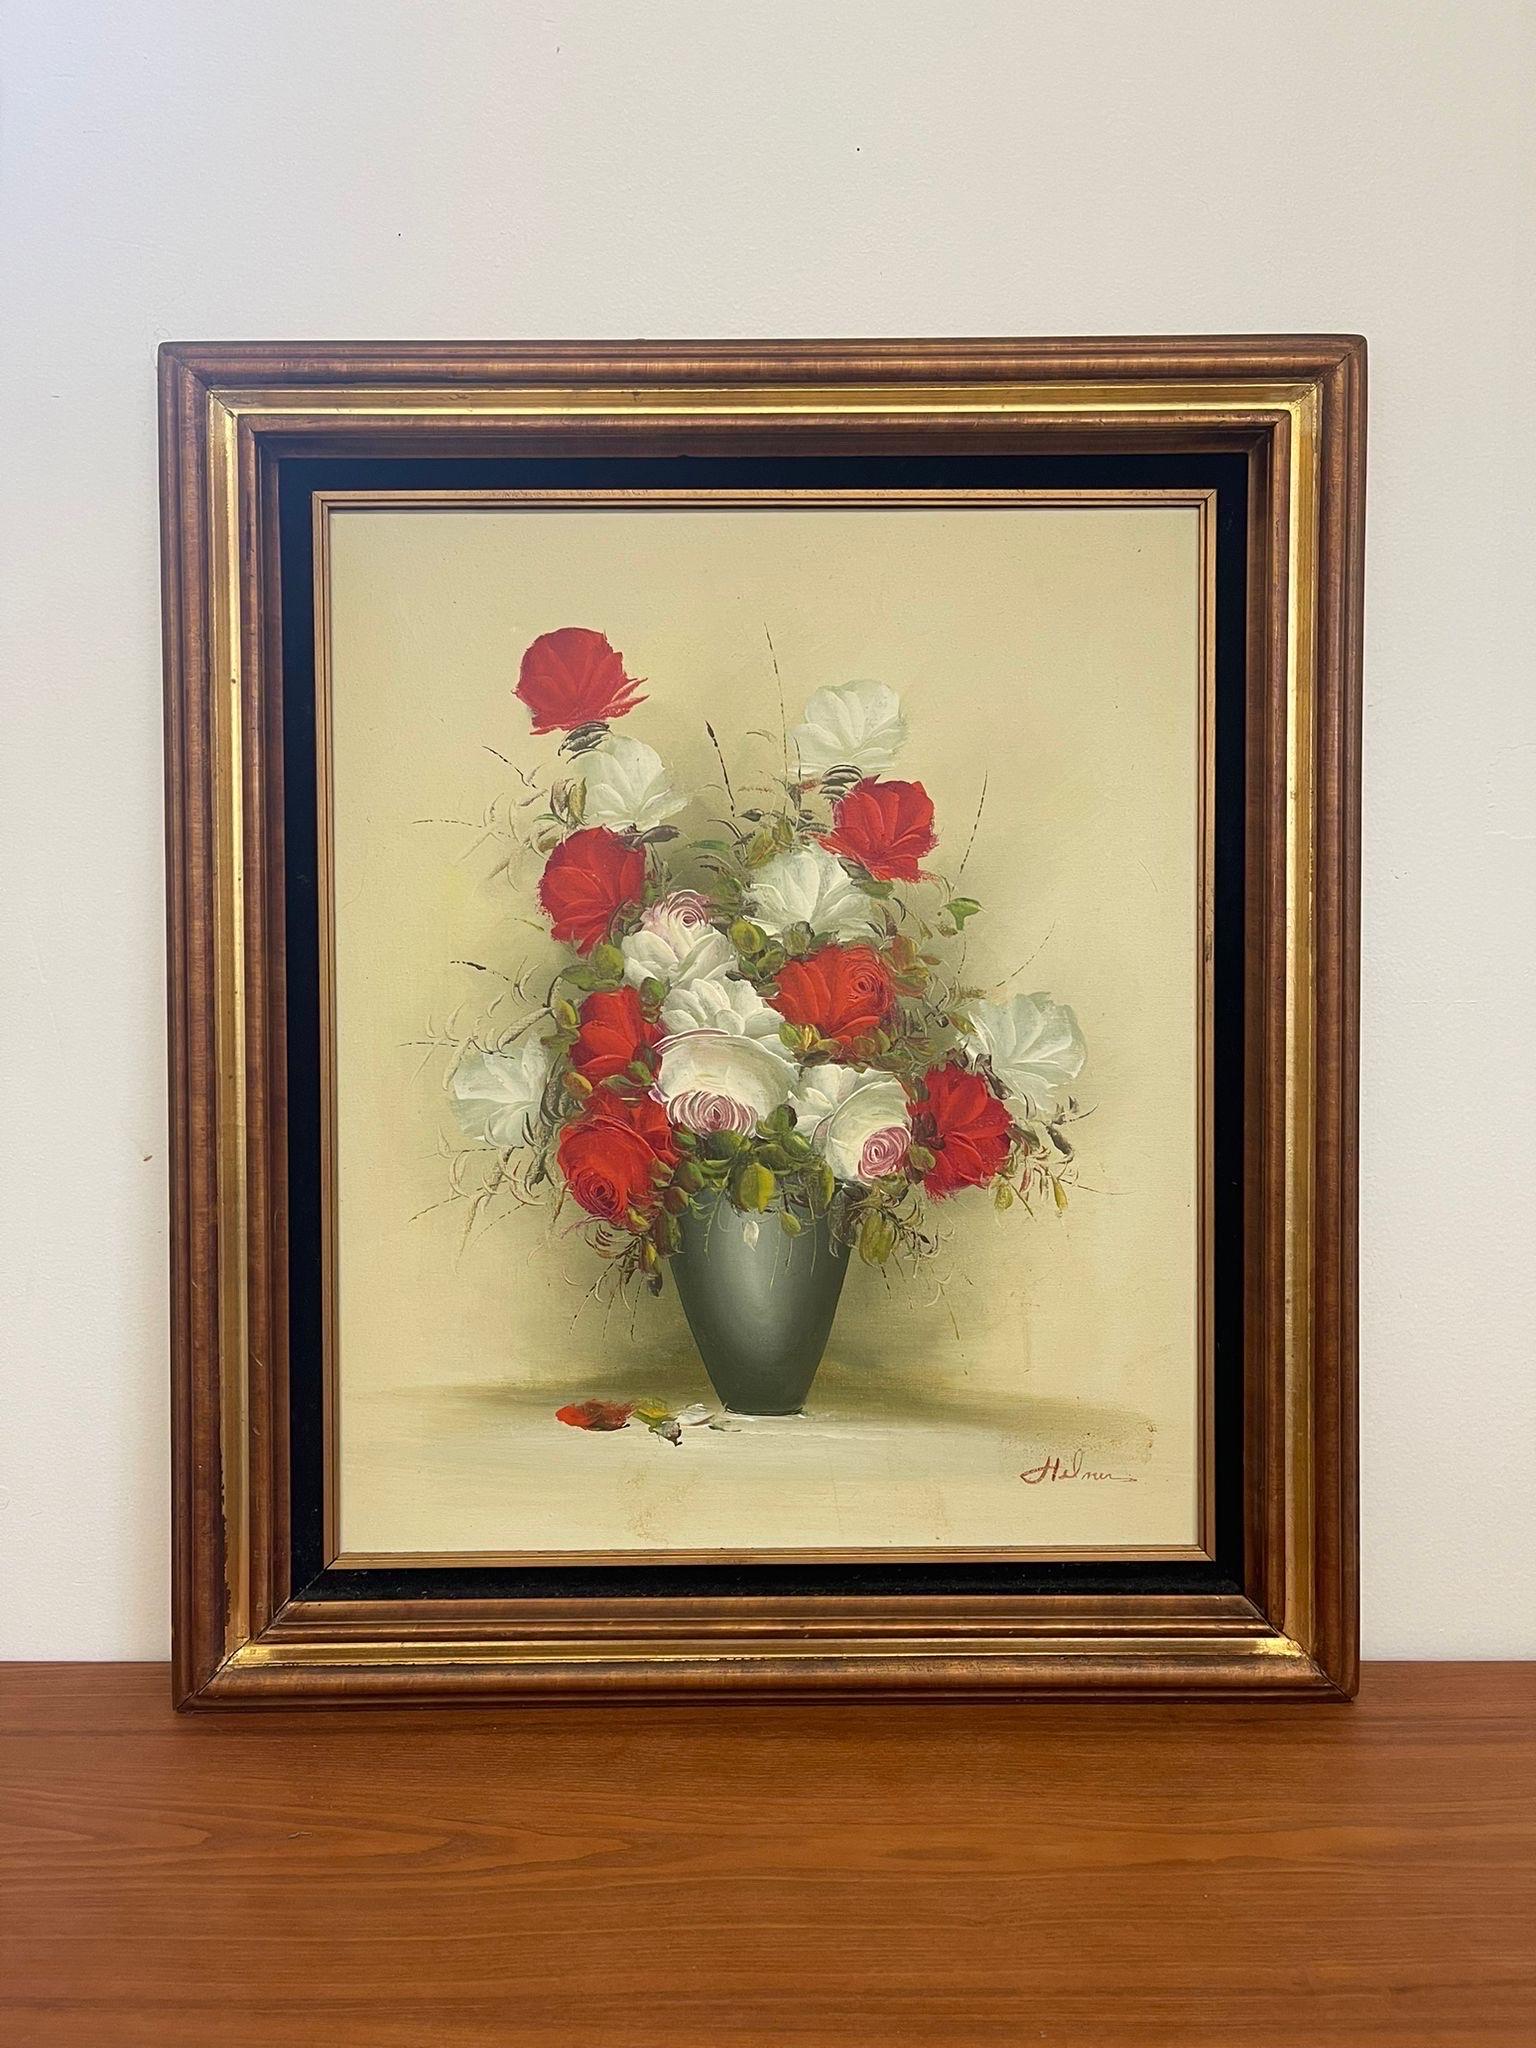 Vintage Painting of Red and Floral Bouquet Signed by Helmer. Frame has Black Velvet or Accent. Possibly Oil or Acrylic on Cavas. Vintage Condition Consistent with Age as Pictured.

Dimensions. 27 W ; 3/4 D ; 31 H